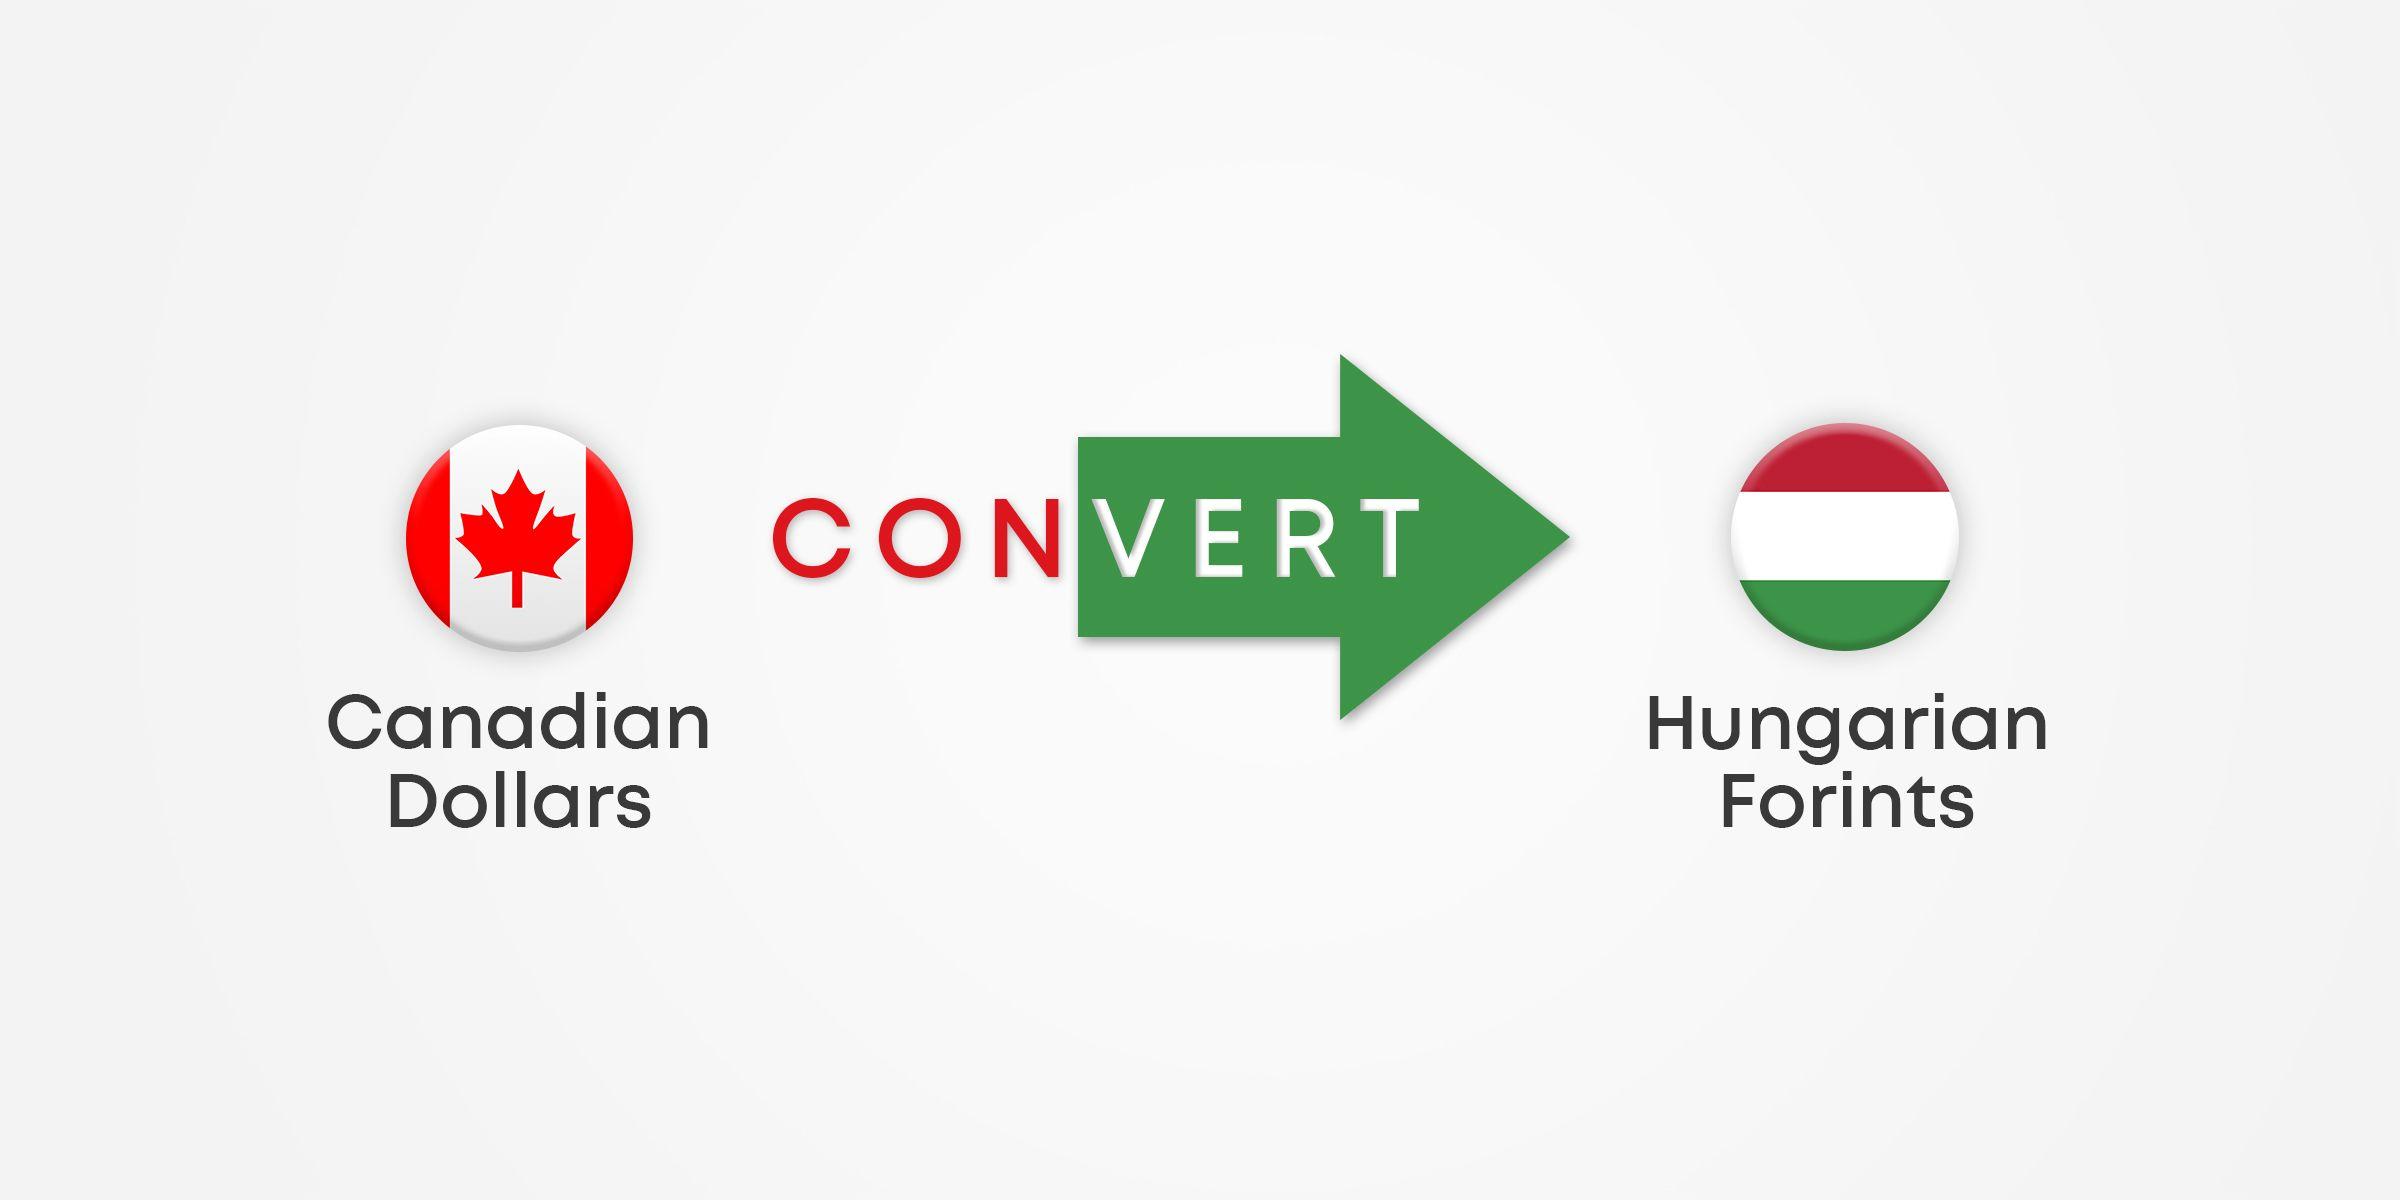 How to Convert Canadian Dollars To Hungarian Forints?